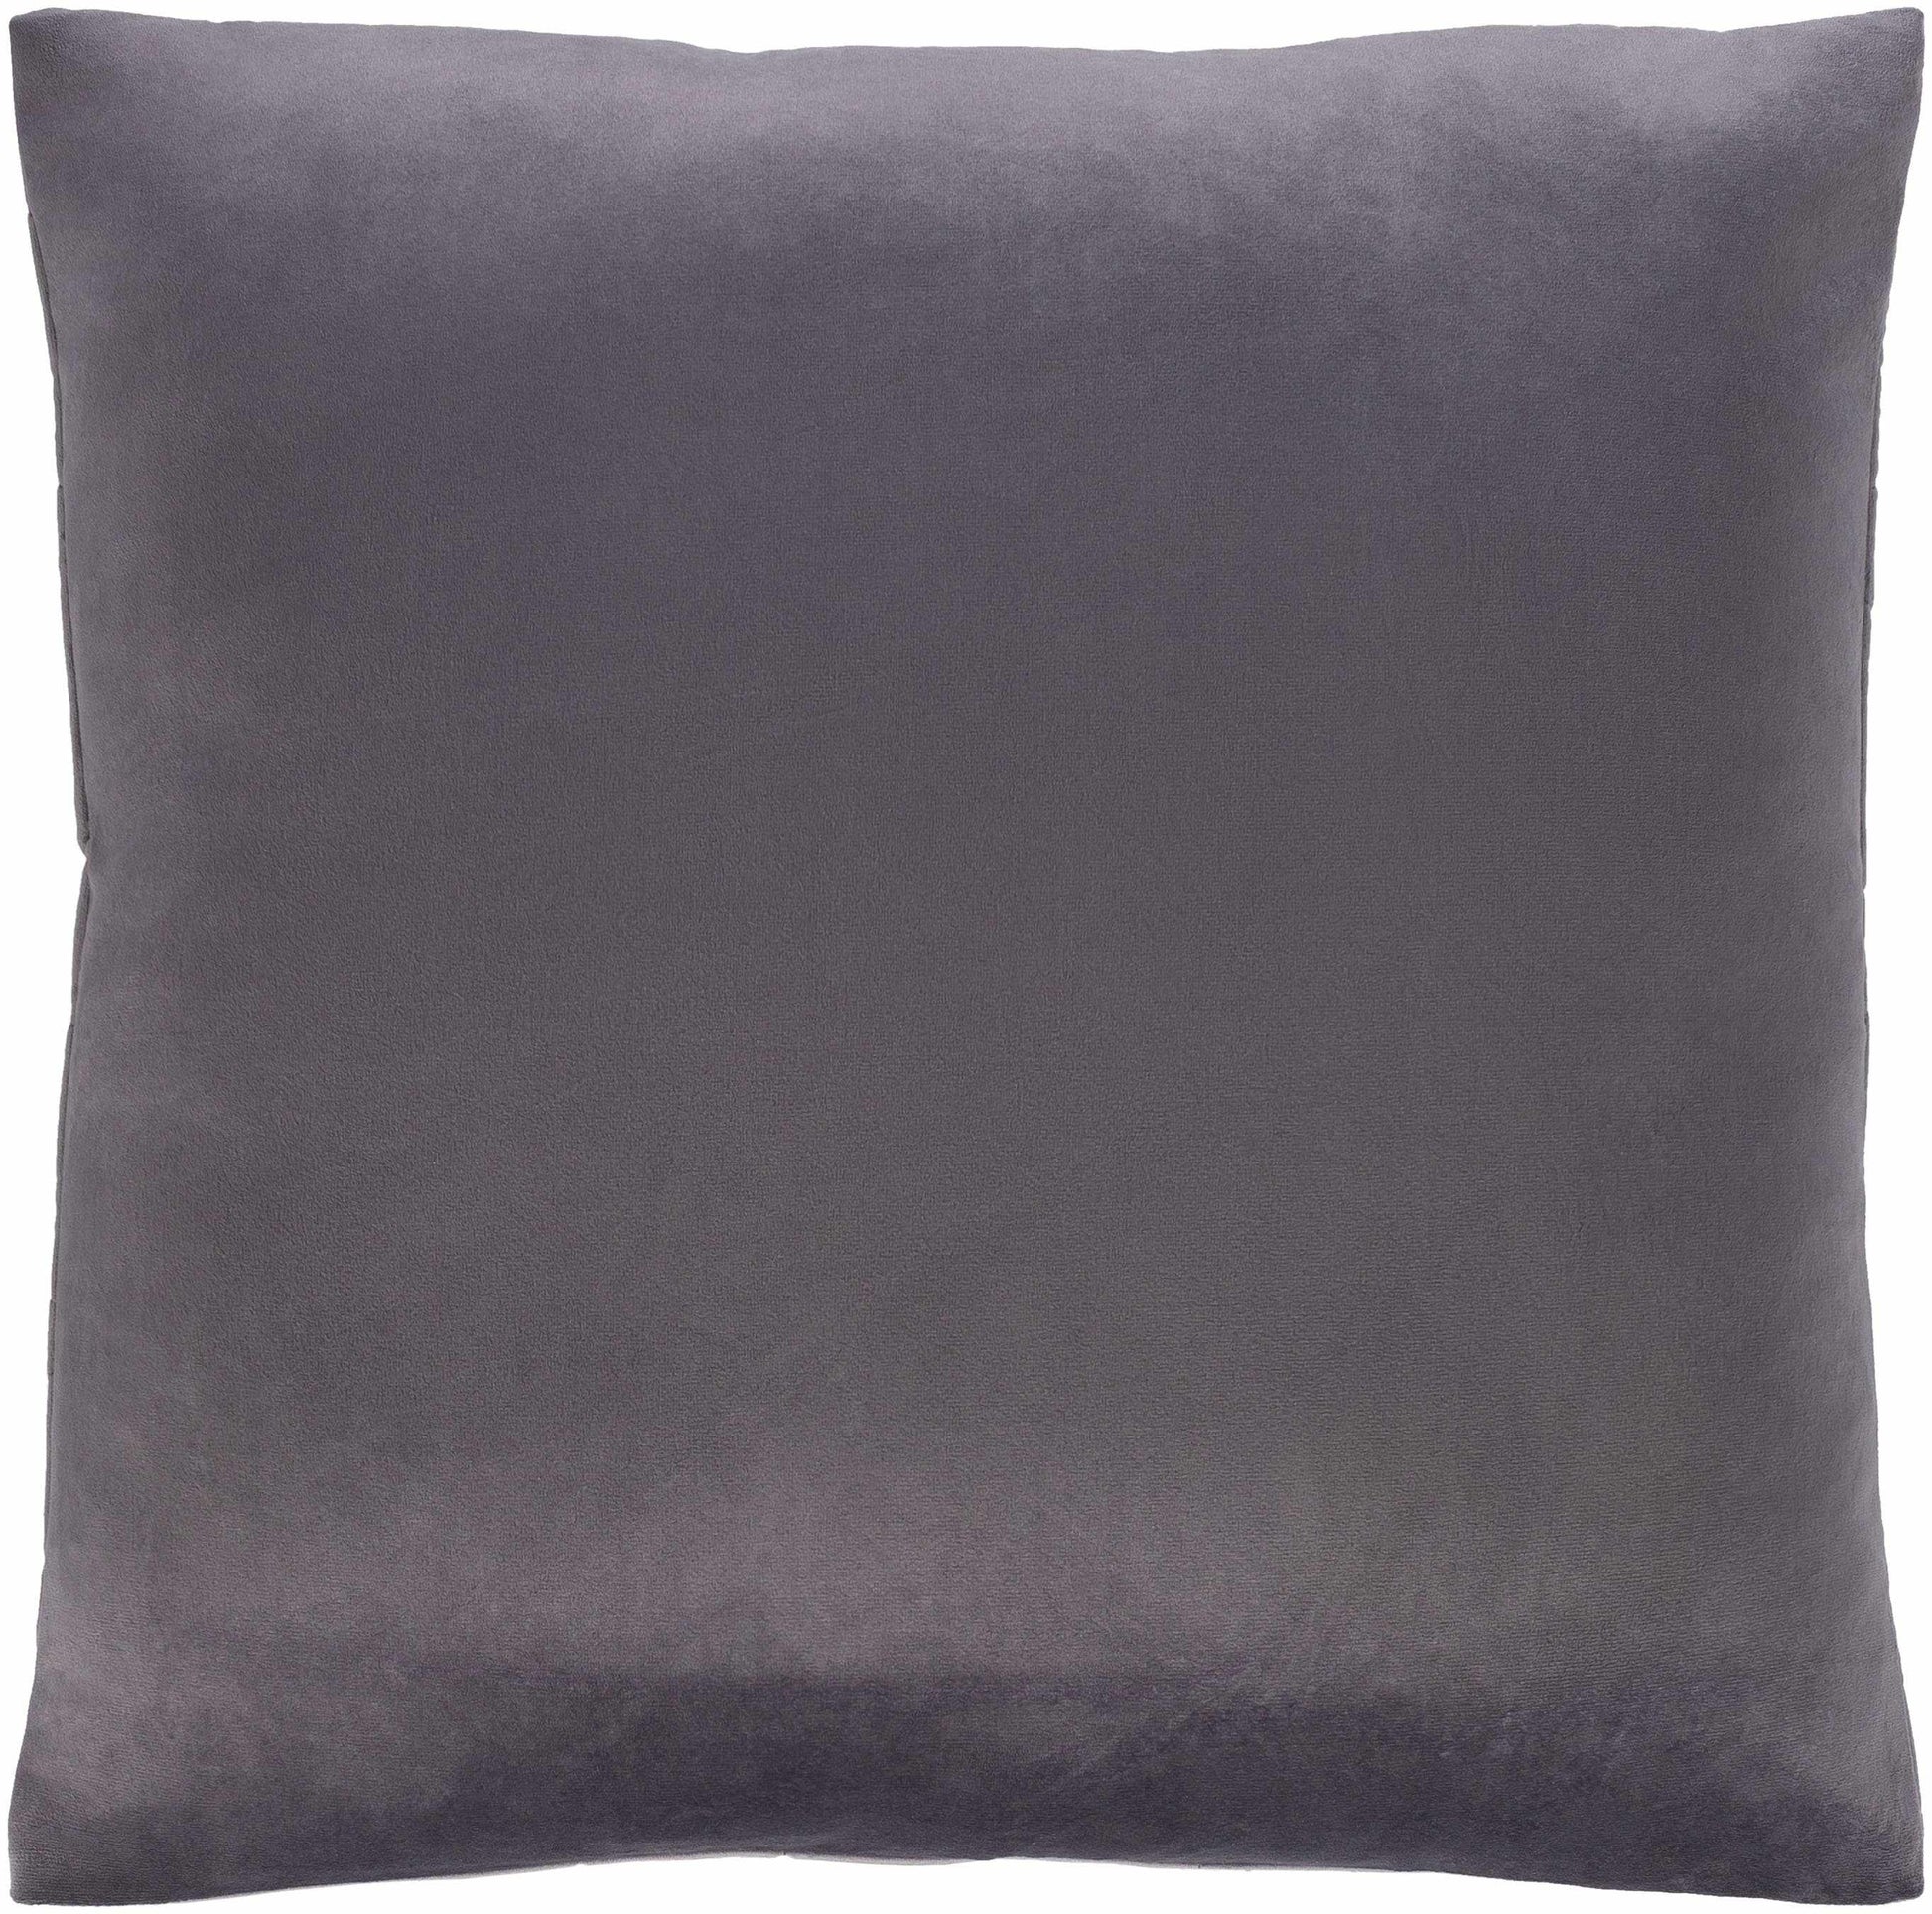 Hove Charcoal Pillow Cover